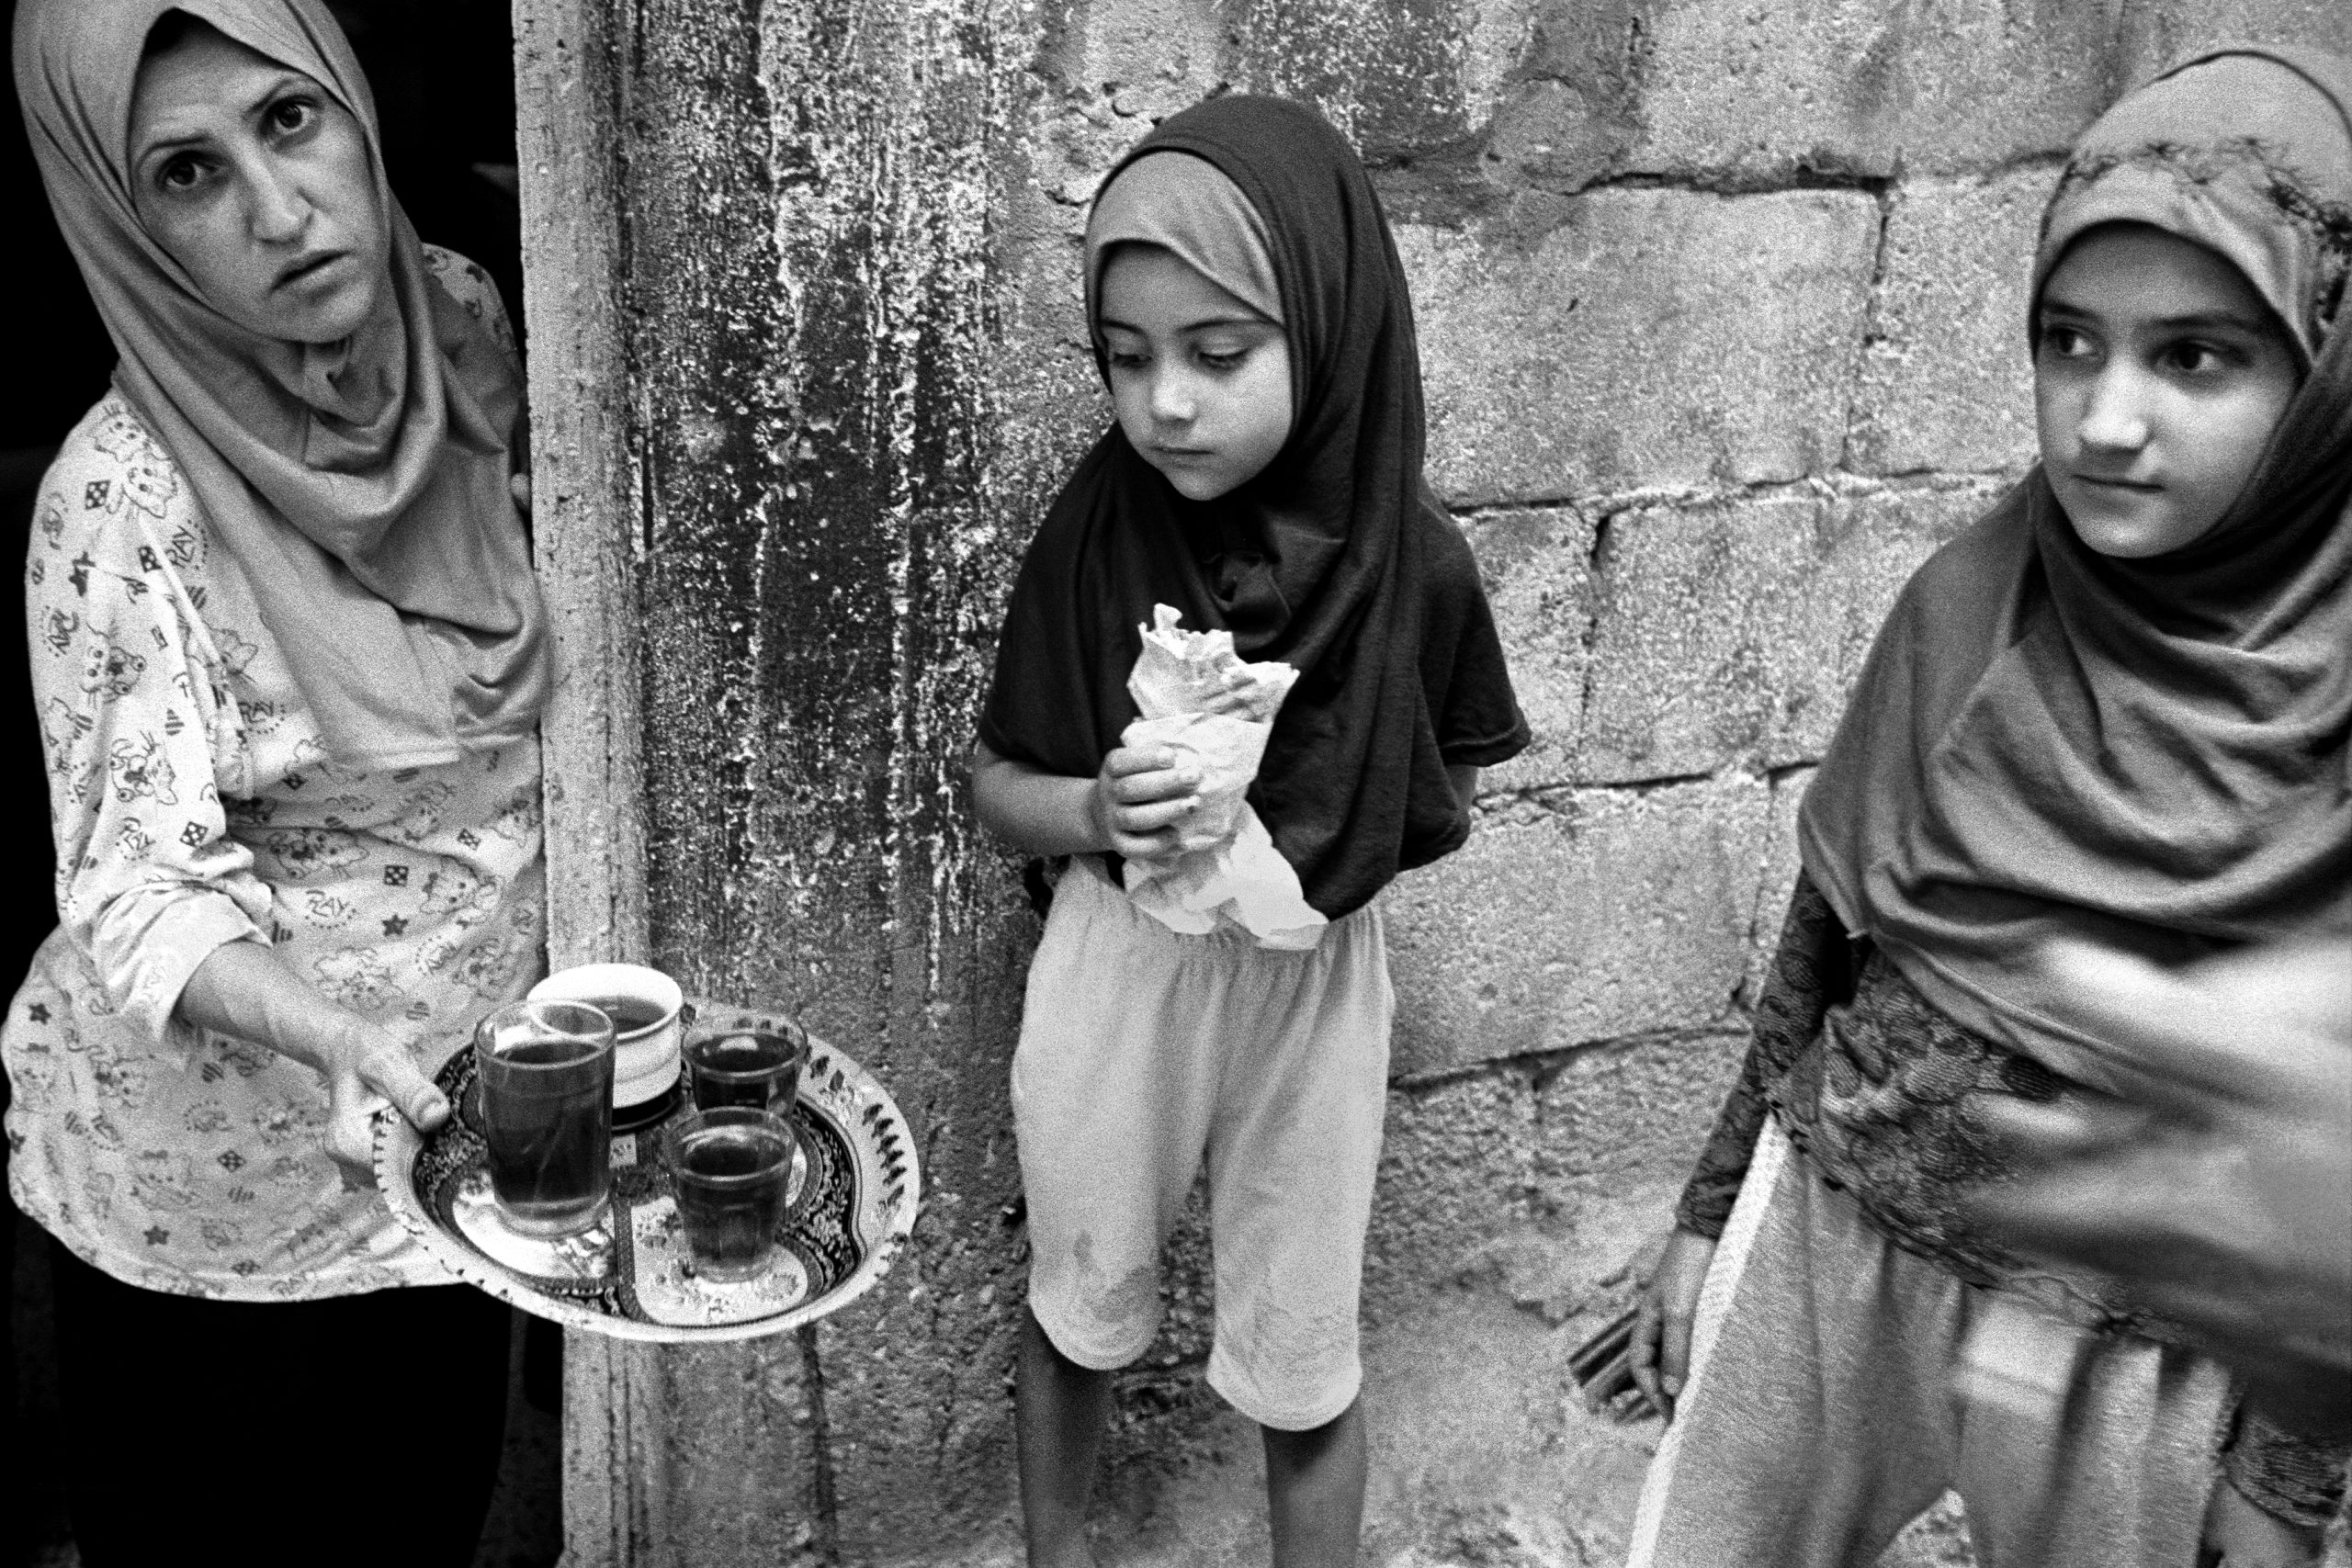 three people appear in a black and white photo. from left to right is a woman in a hijab offering tea to two girls. one girl in the middle eats bread and looks at the tea. the girl on the far right looks off into the distance.